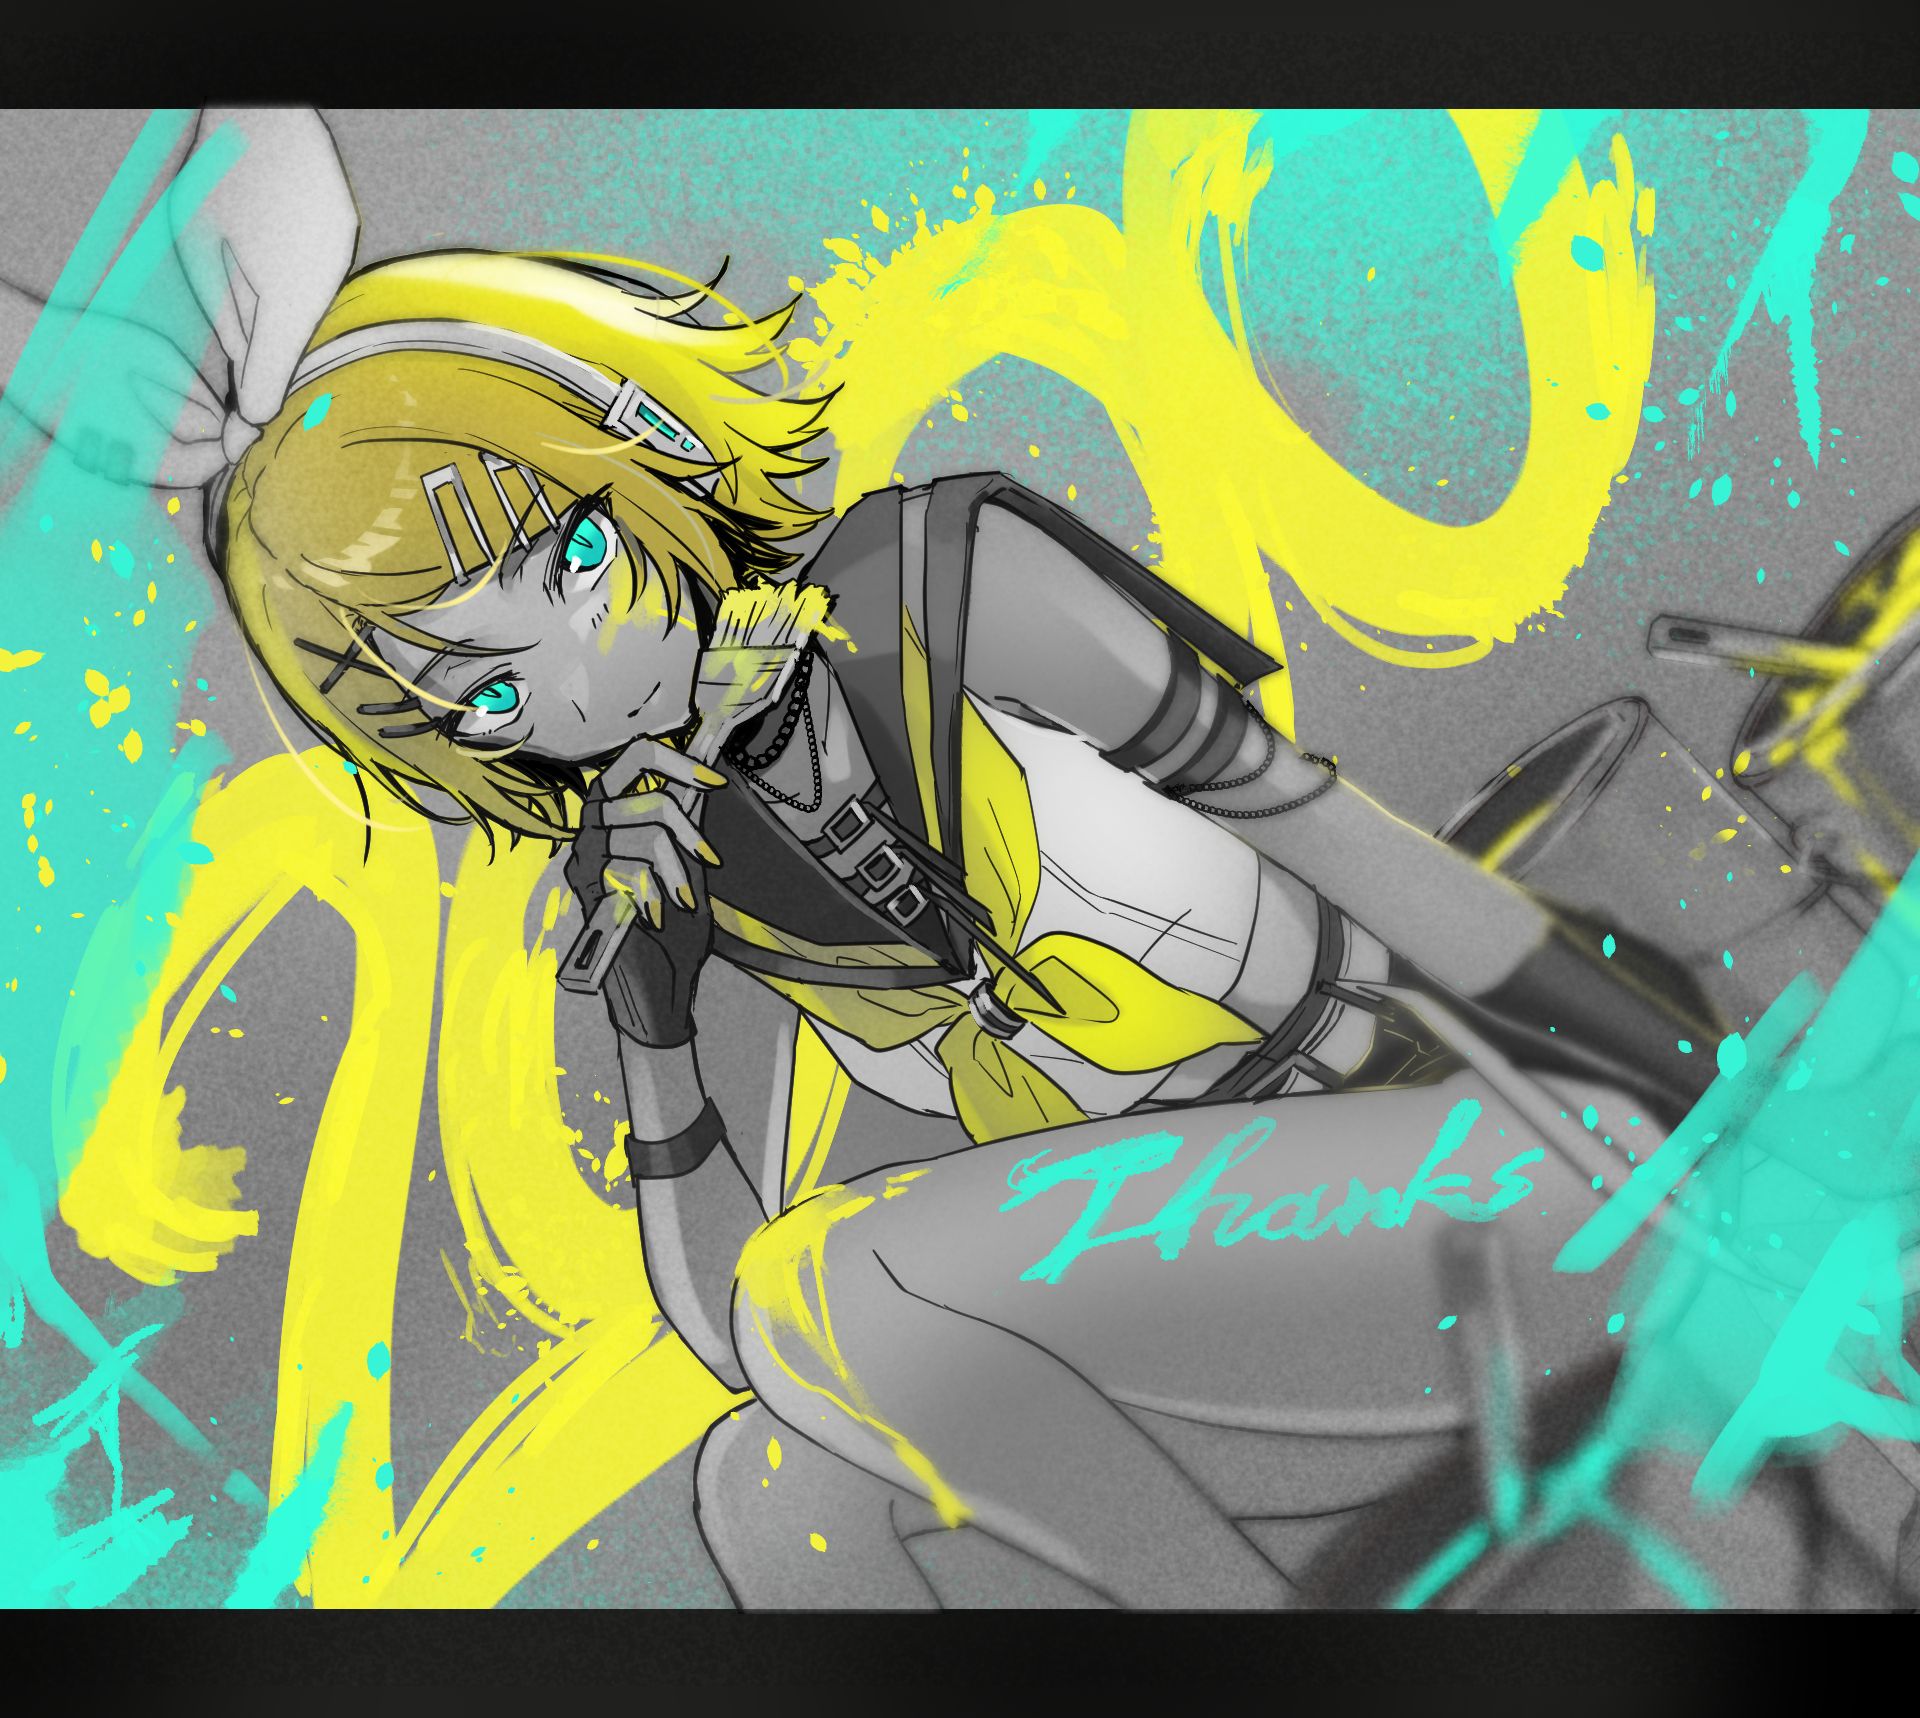 A digital art piece of Rin, a character from Vocaloid. - 